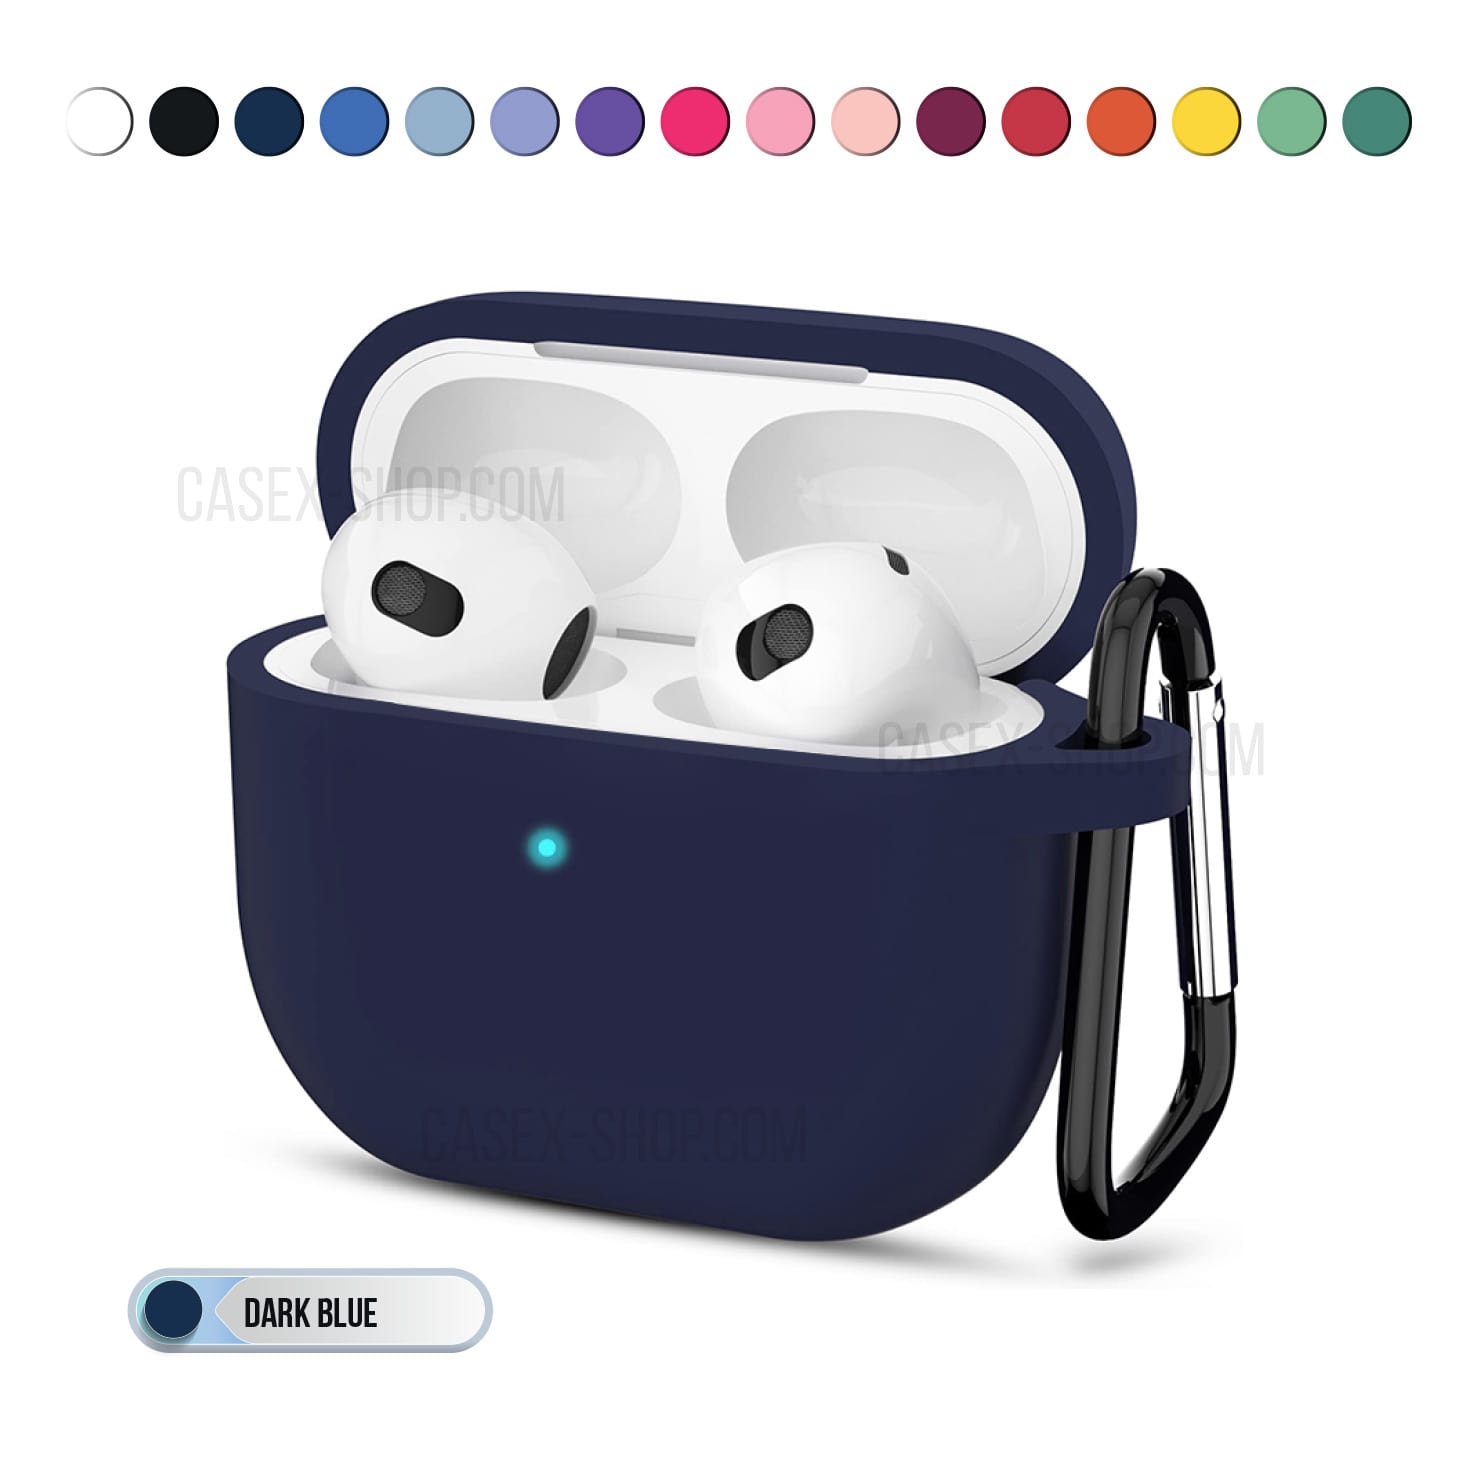 Airpods hard silicone case